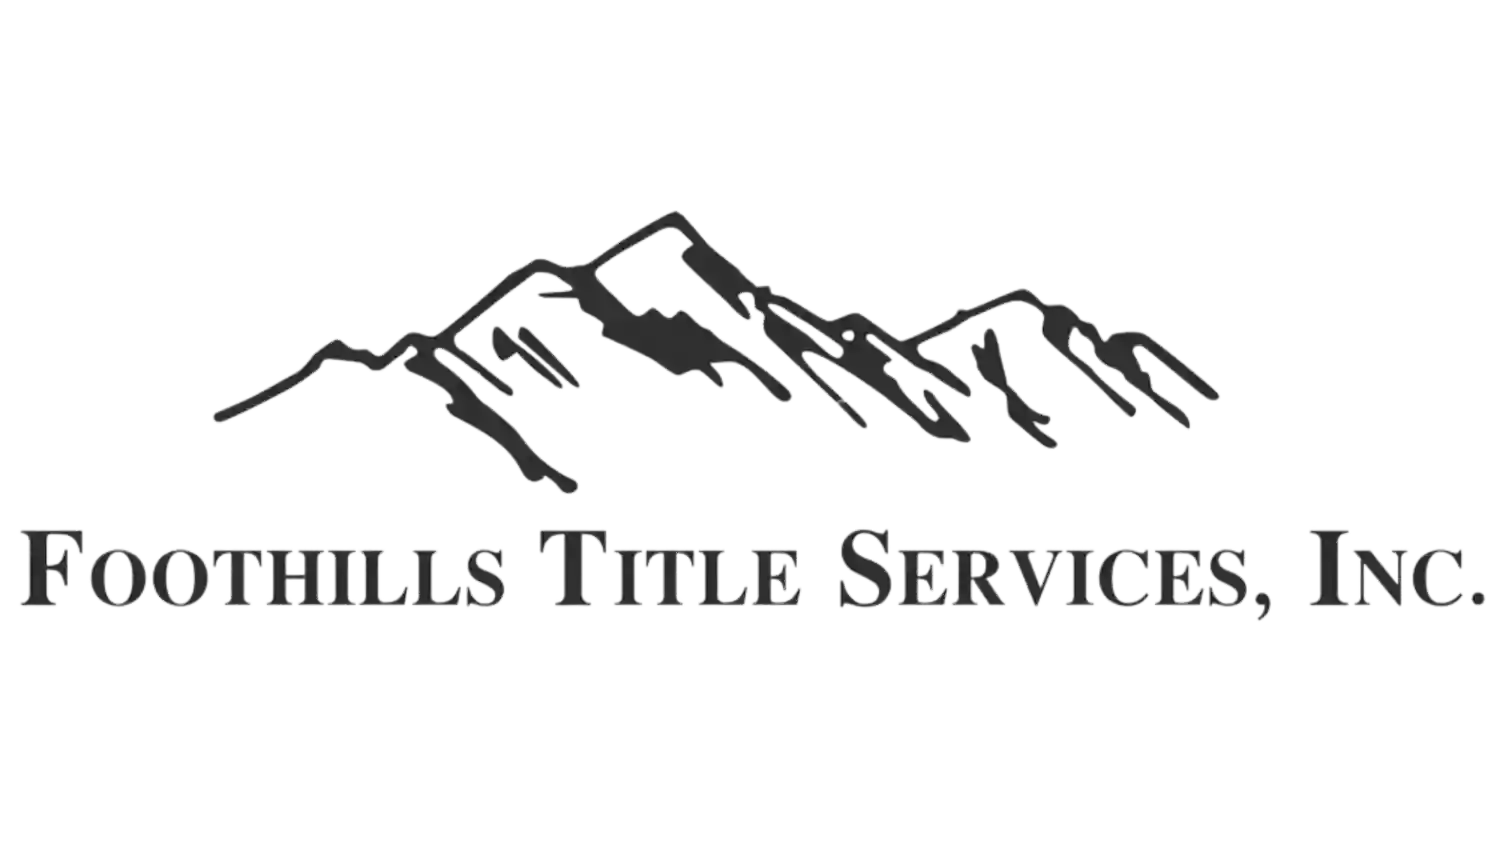 Foothills Title Services, Inc.